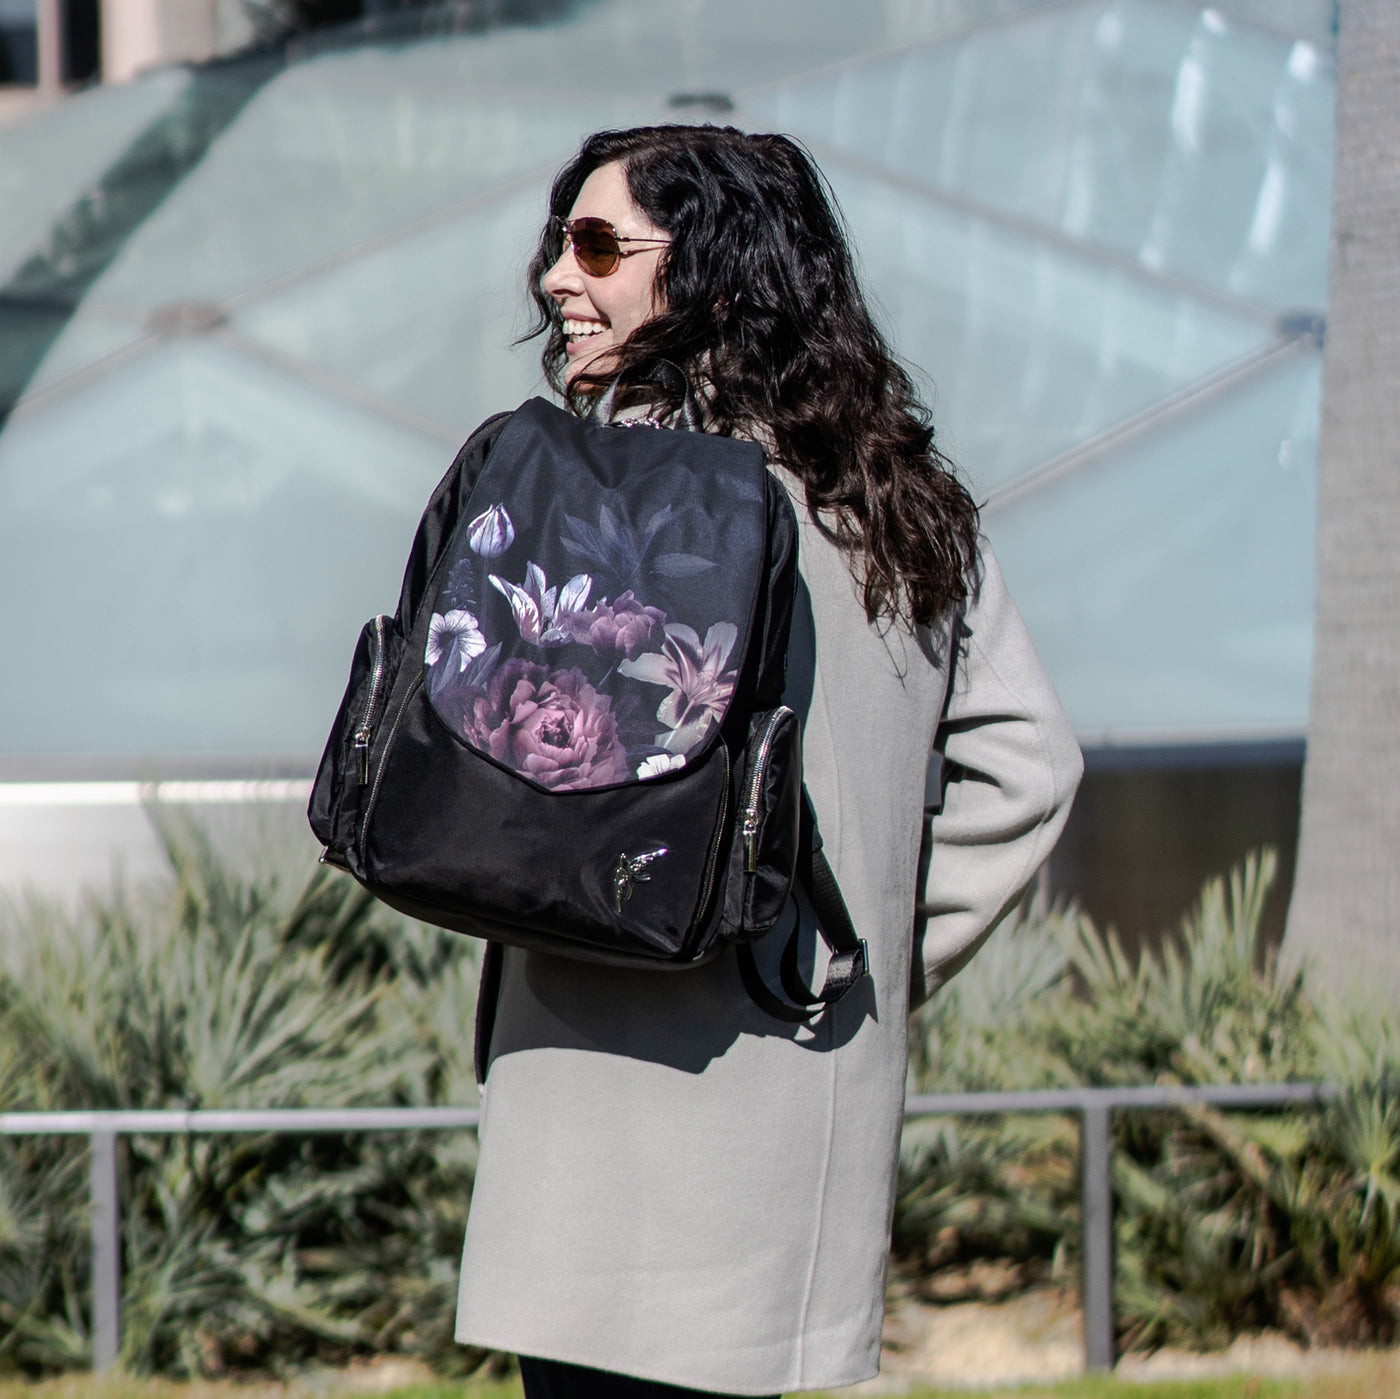 Laptop bag by GraceTech featuring the Dark Floral Print on our Laptop Backpack with a separate computer section.